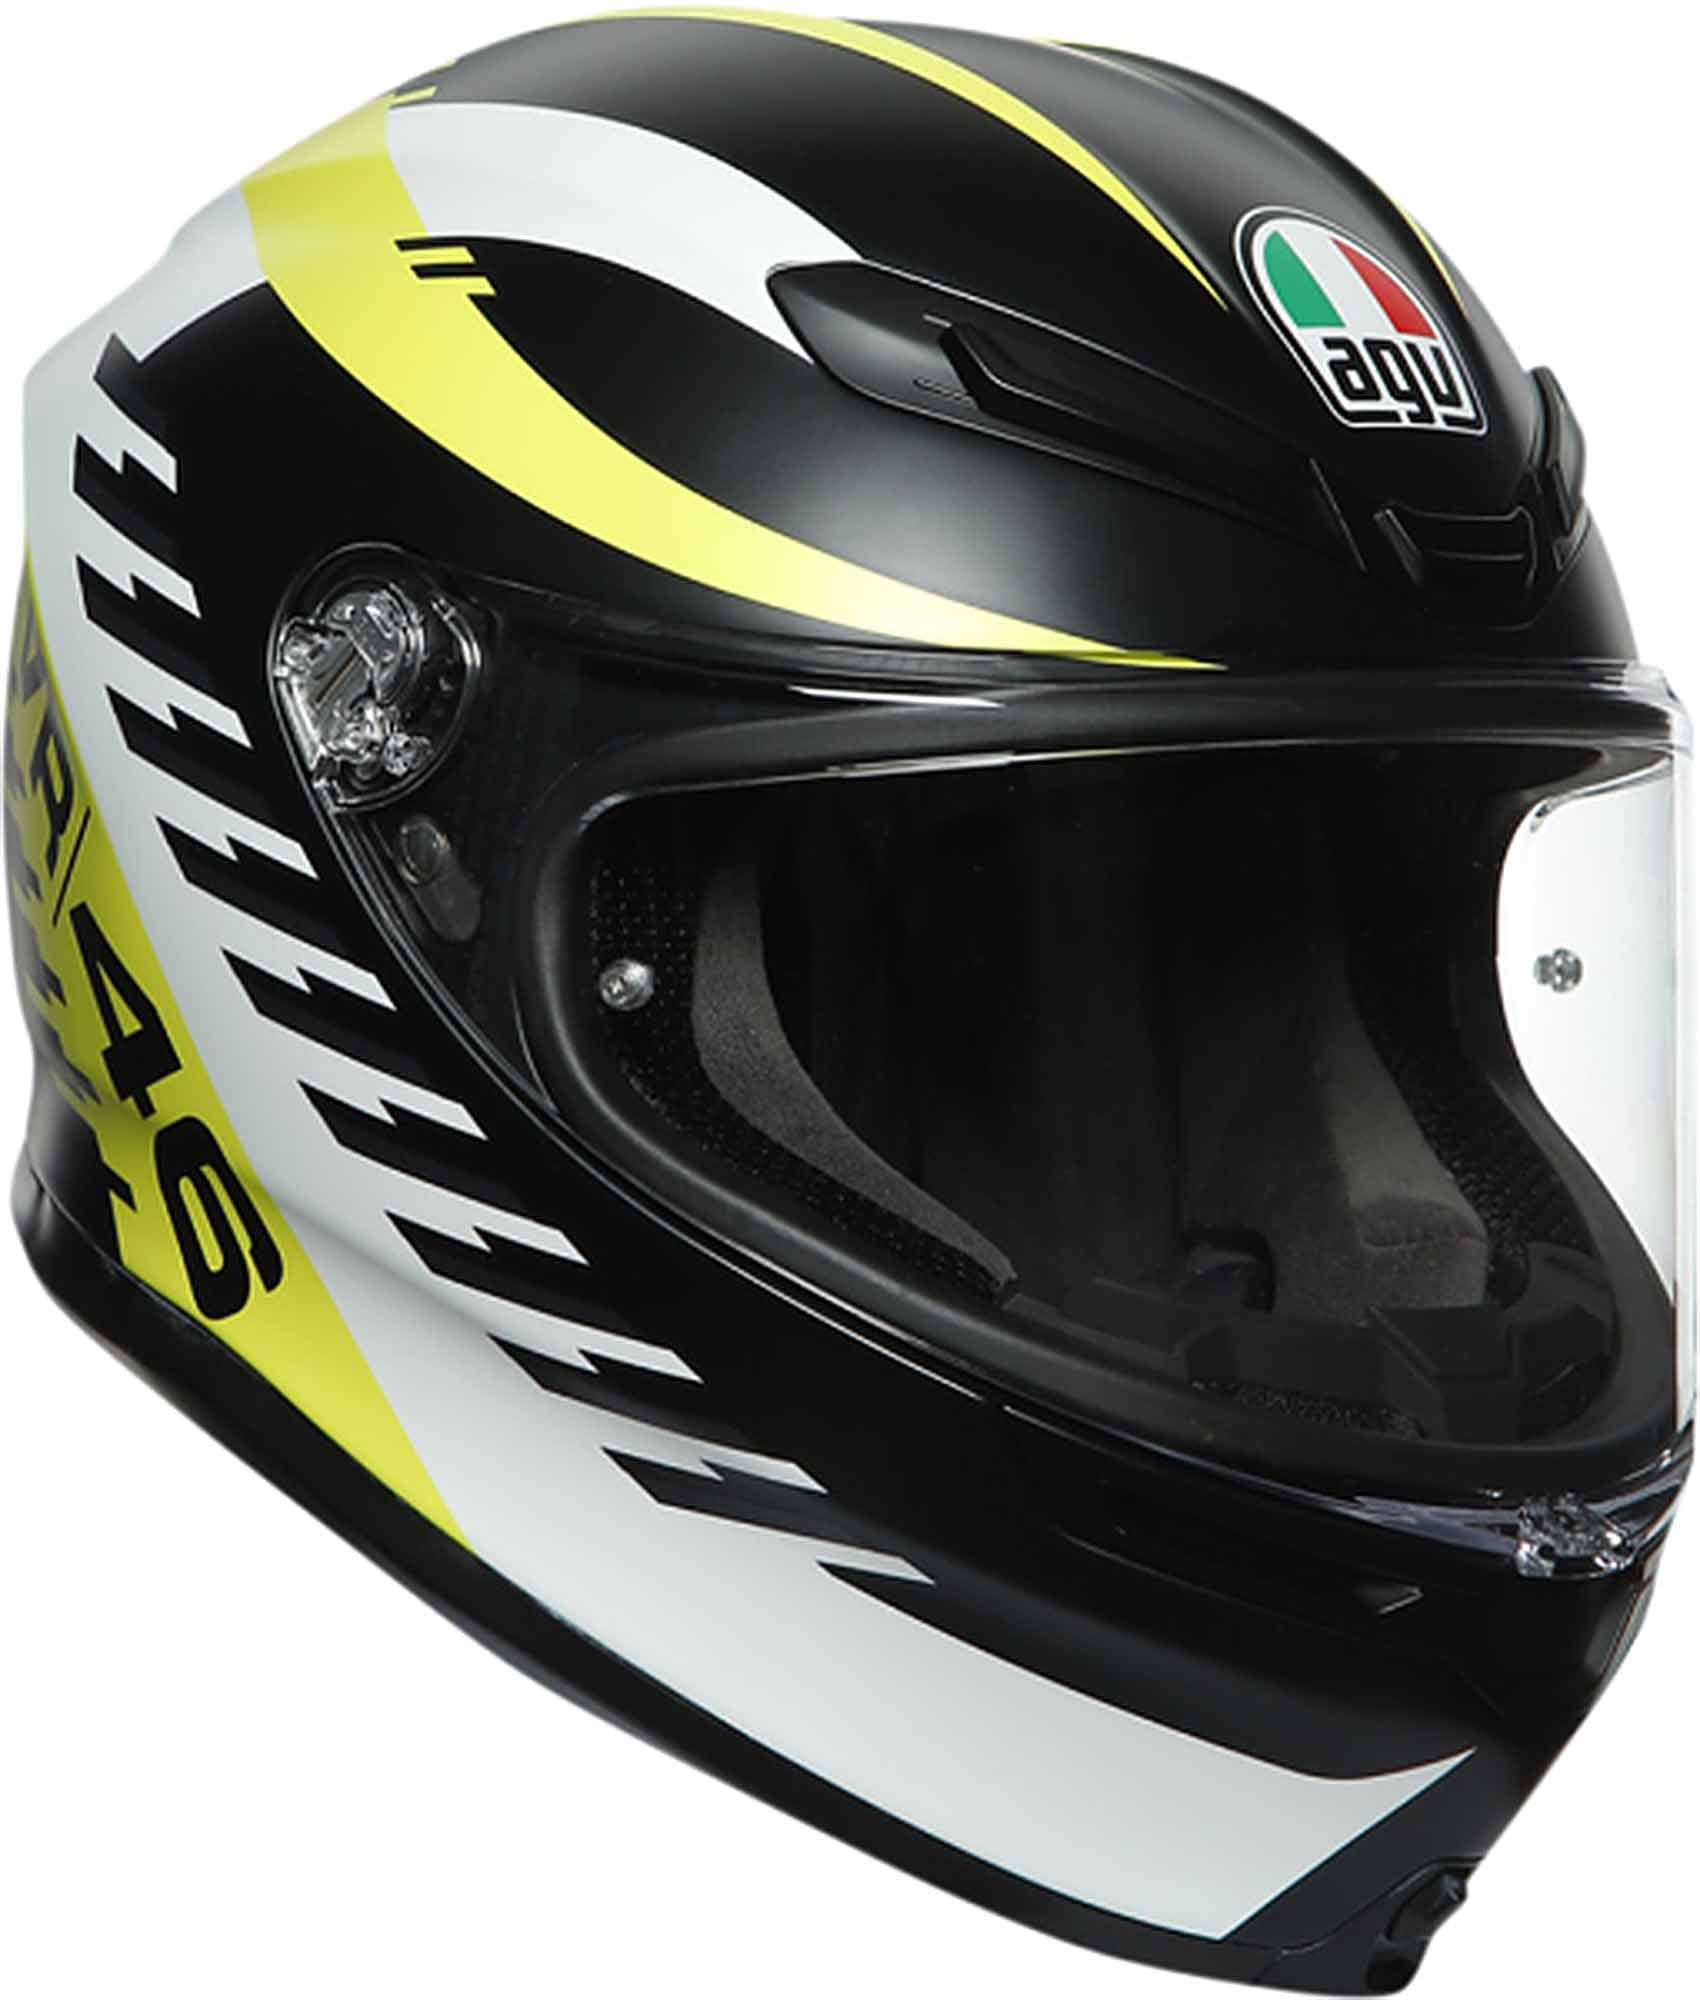 casco moto, casco moto Suppliers and Manufacturers at